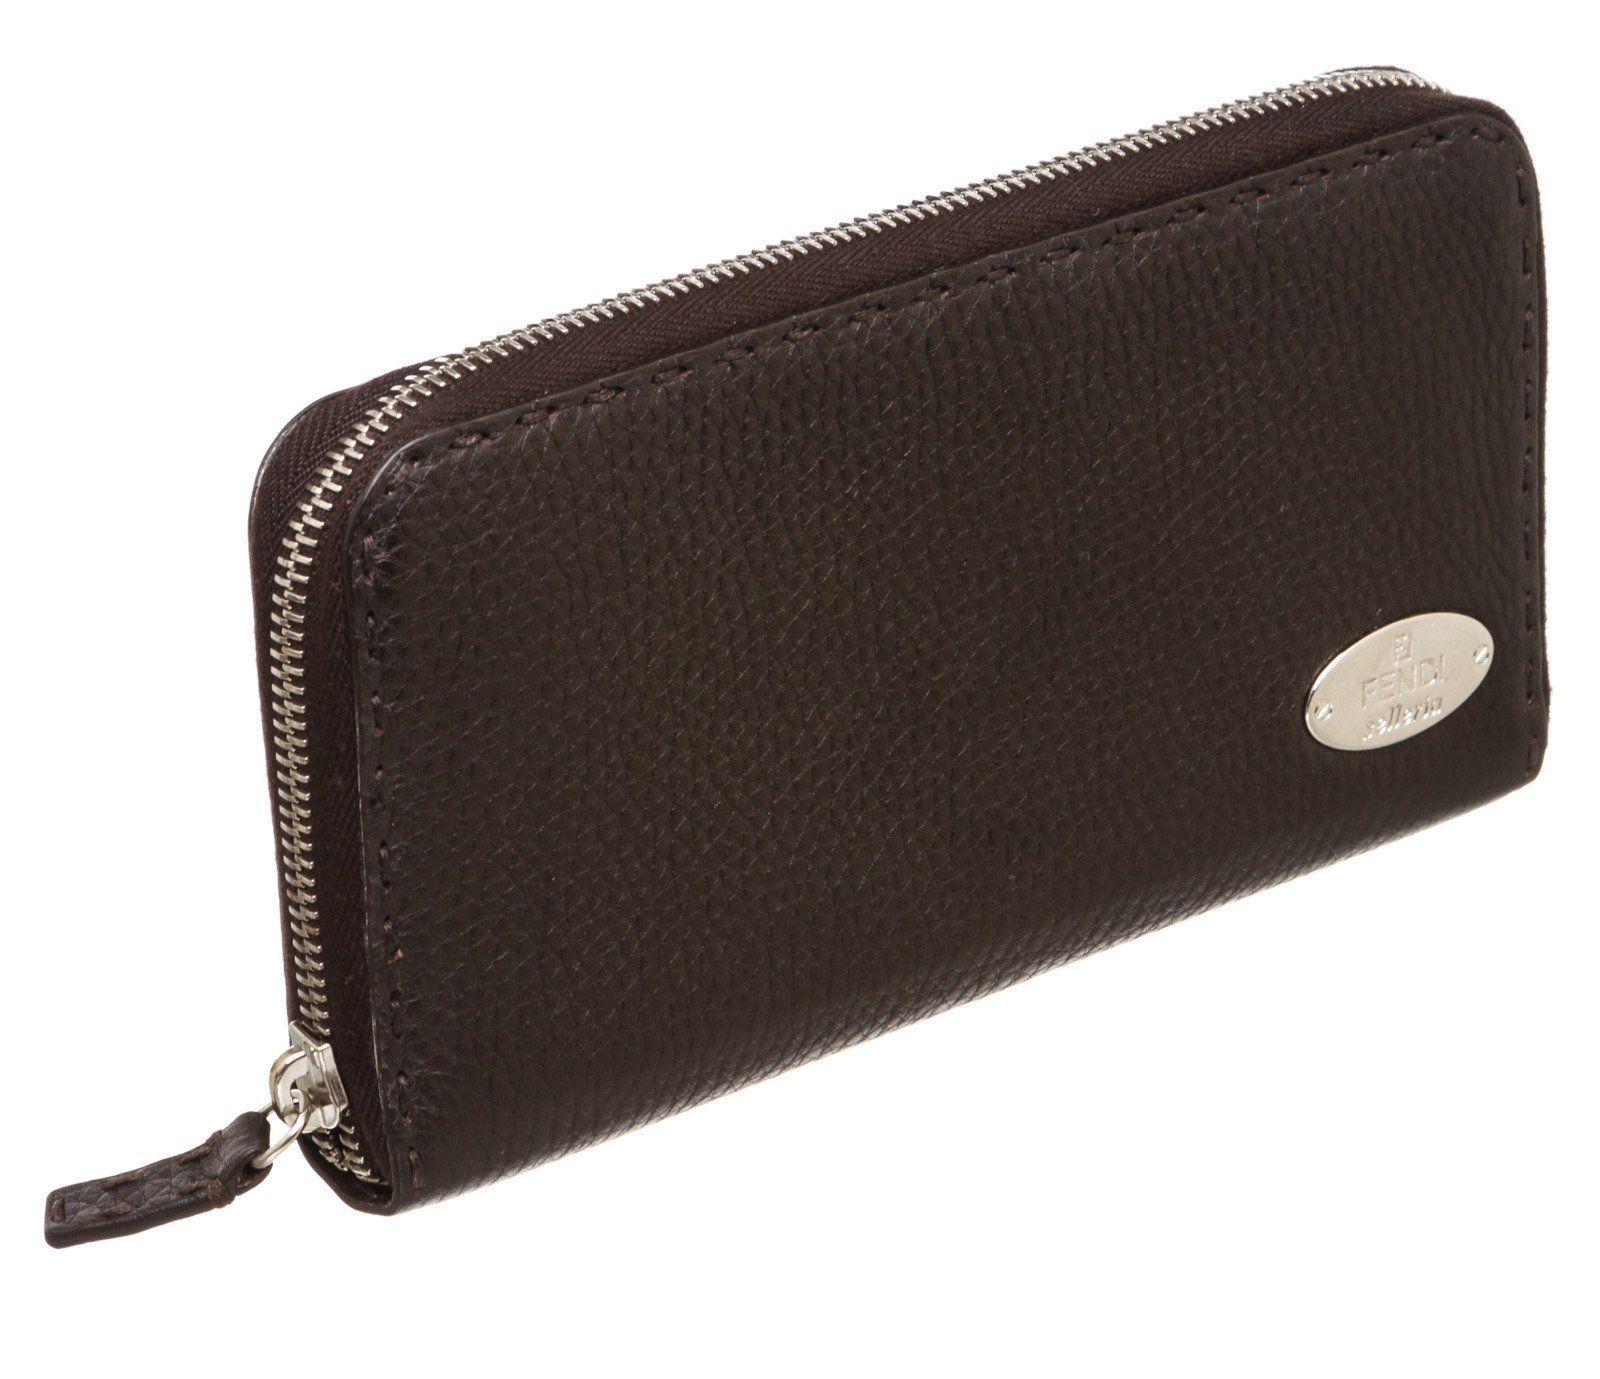 Fendi Salleria dark brown leather zip around wallet with silver-tone hardware, center zip pocket, dual bill pockets, and eight card slots.



14961MSCMeasurements:
 Length: 7.5 in / 19 cm
 Width: 1 in / 3 cm
 4 in / 10 cm

Condition: Pre-Owned